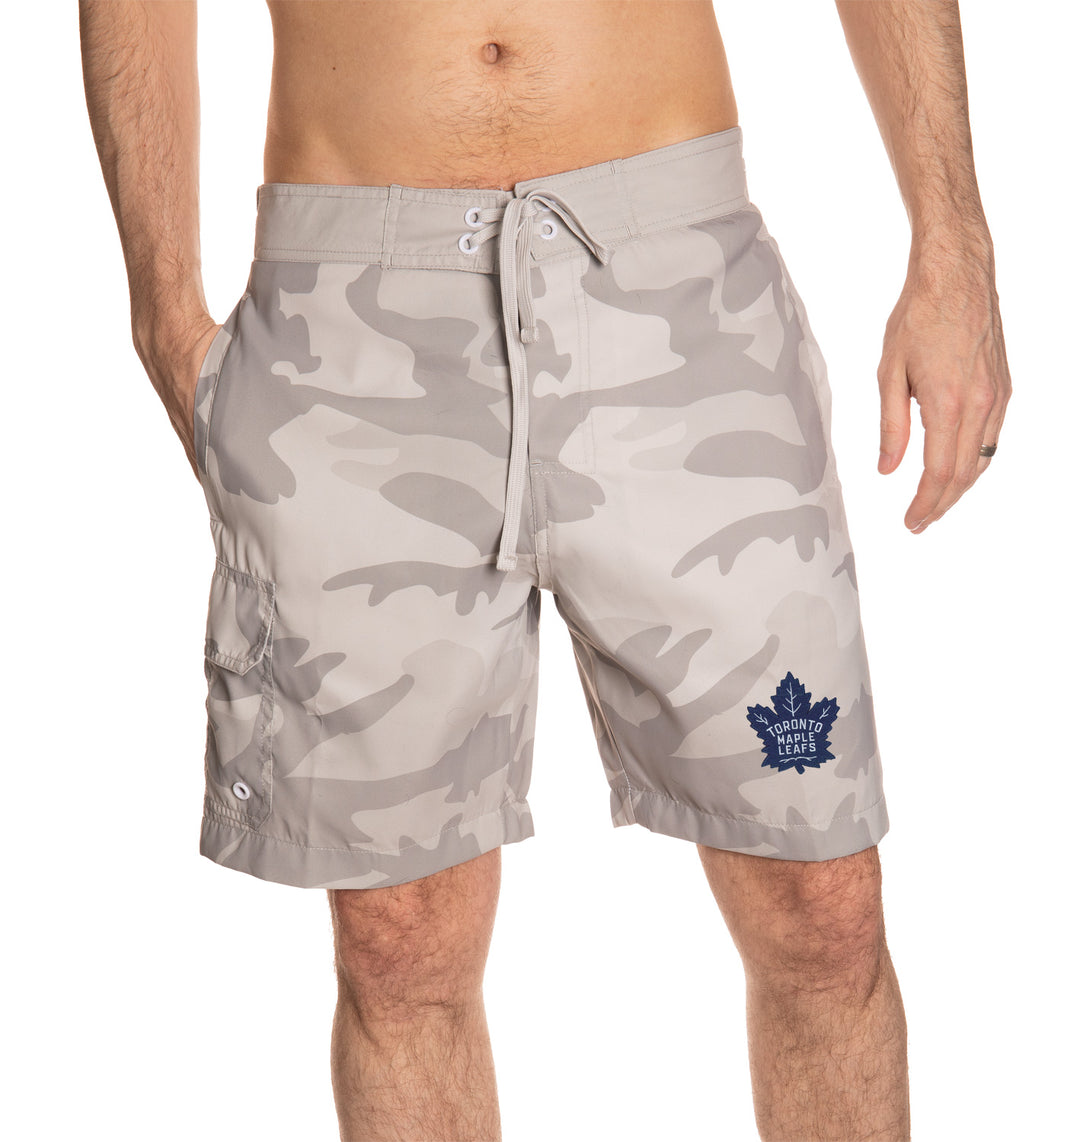 Toronto Maple Leafs Tan Camo Boardshorts Front View